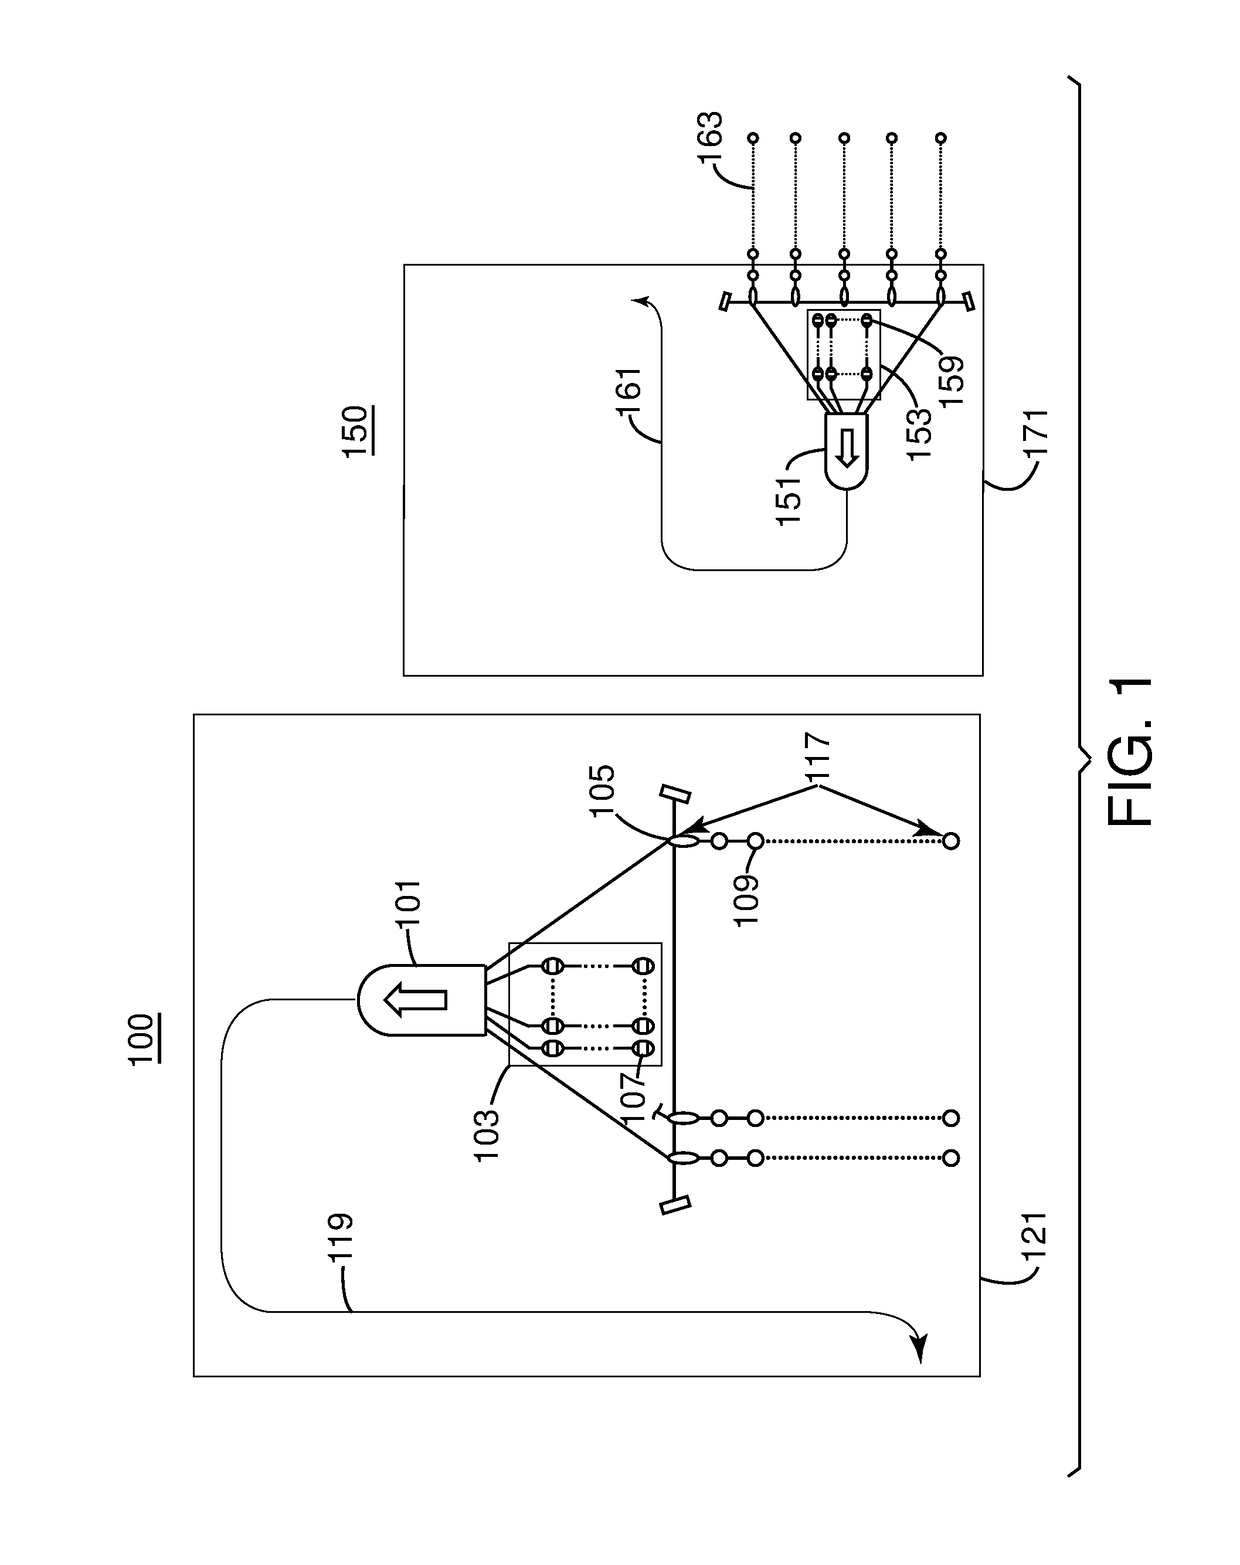 Device and method for mitigating seismic survey interference